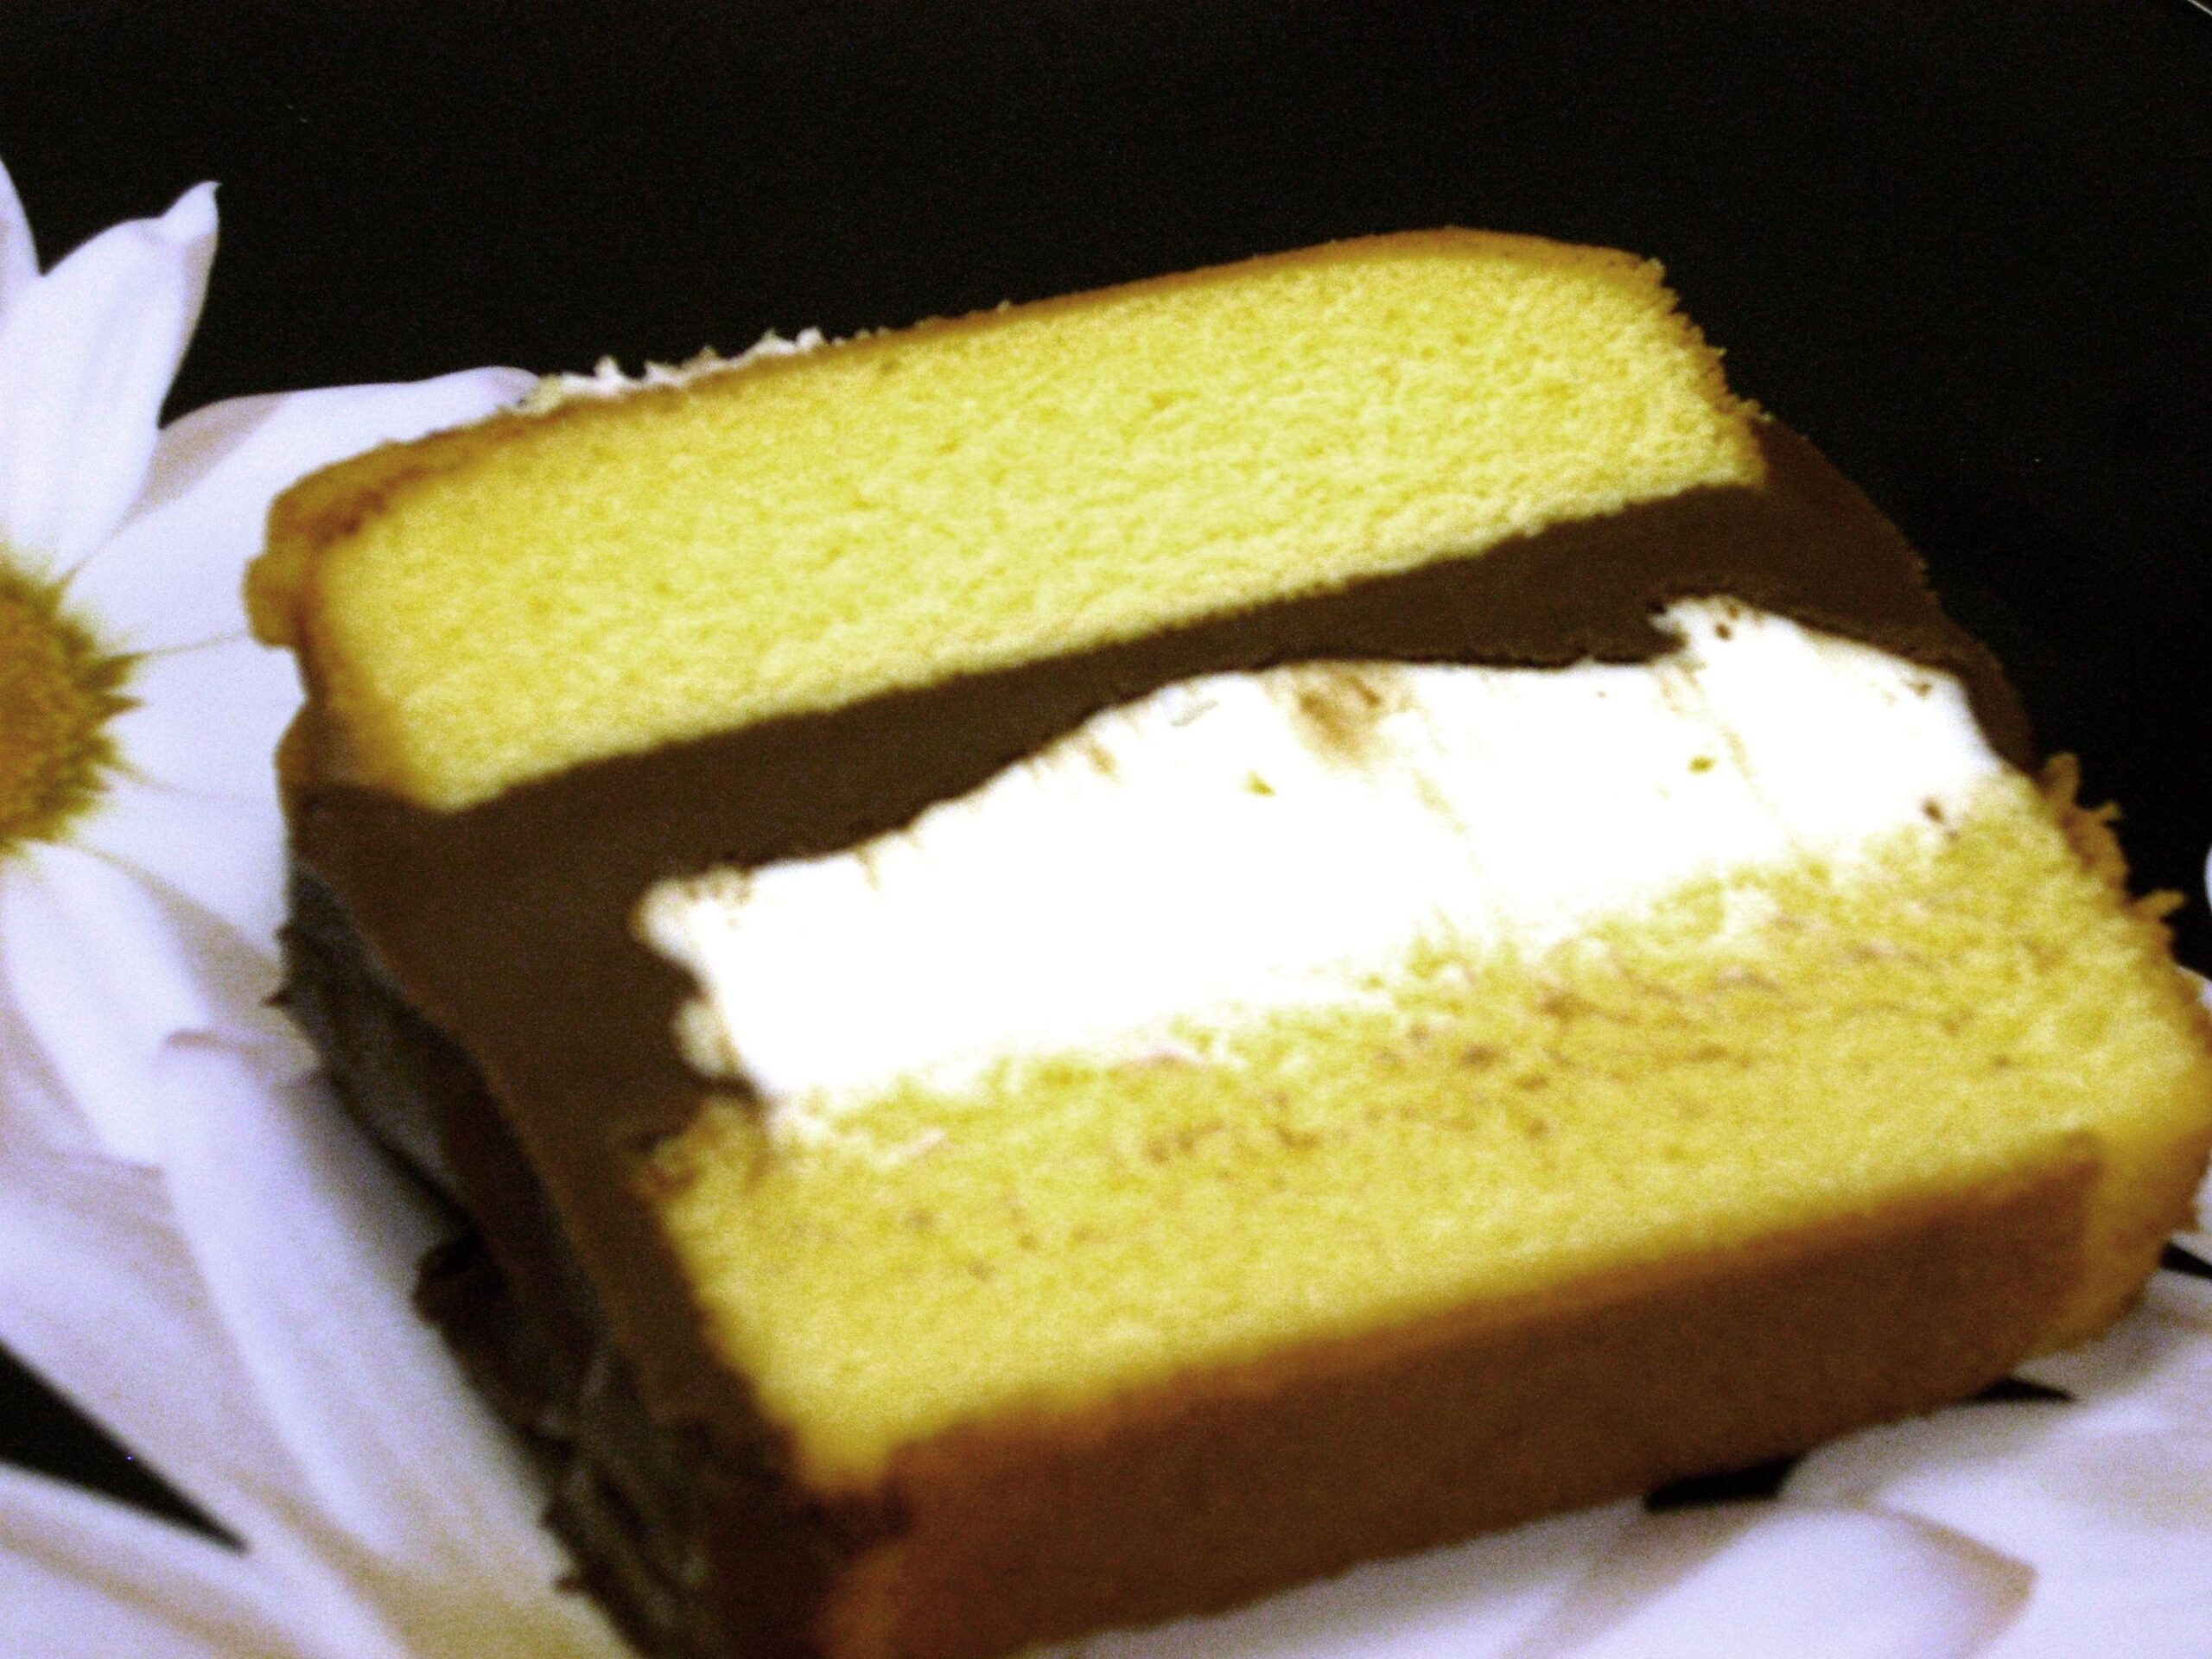  The soft and creamy center of the Cream Cheese and Nutella Filled Pound Cake